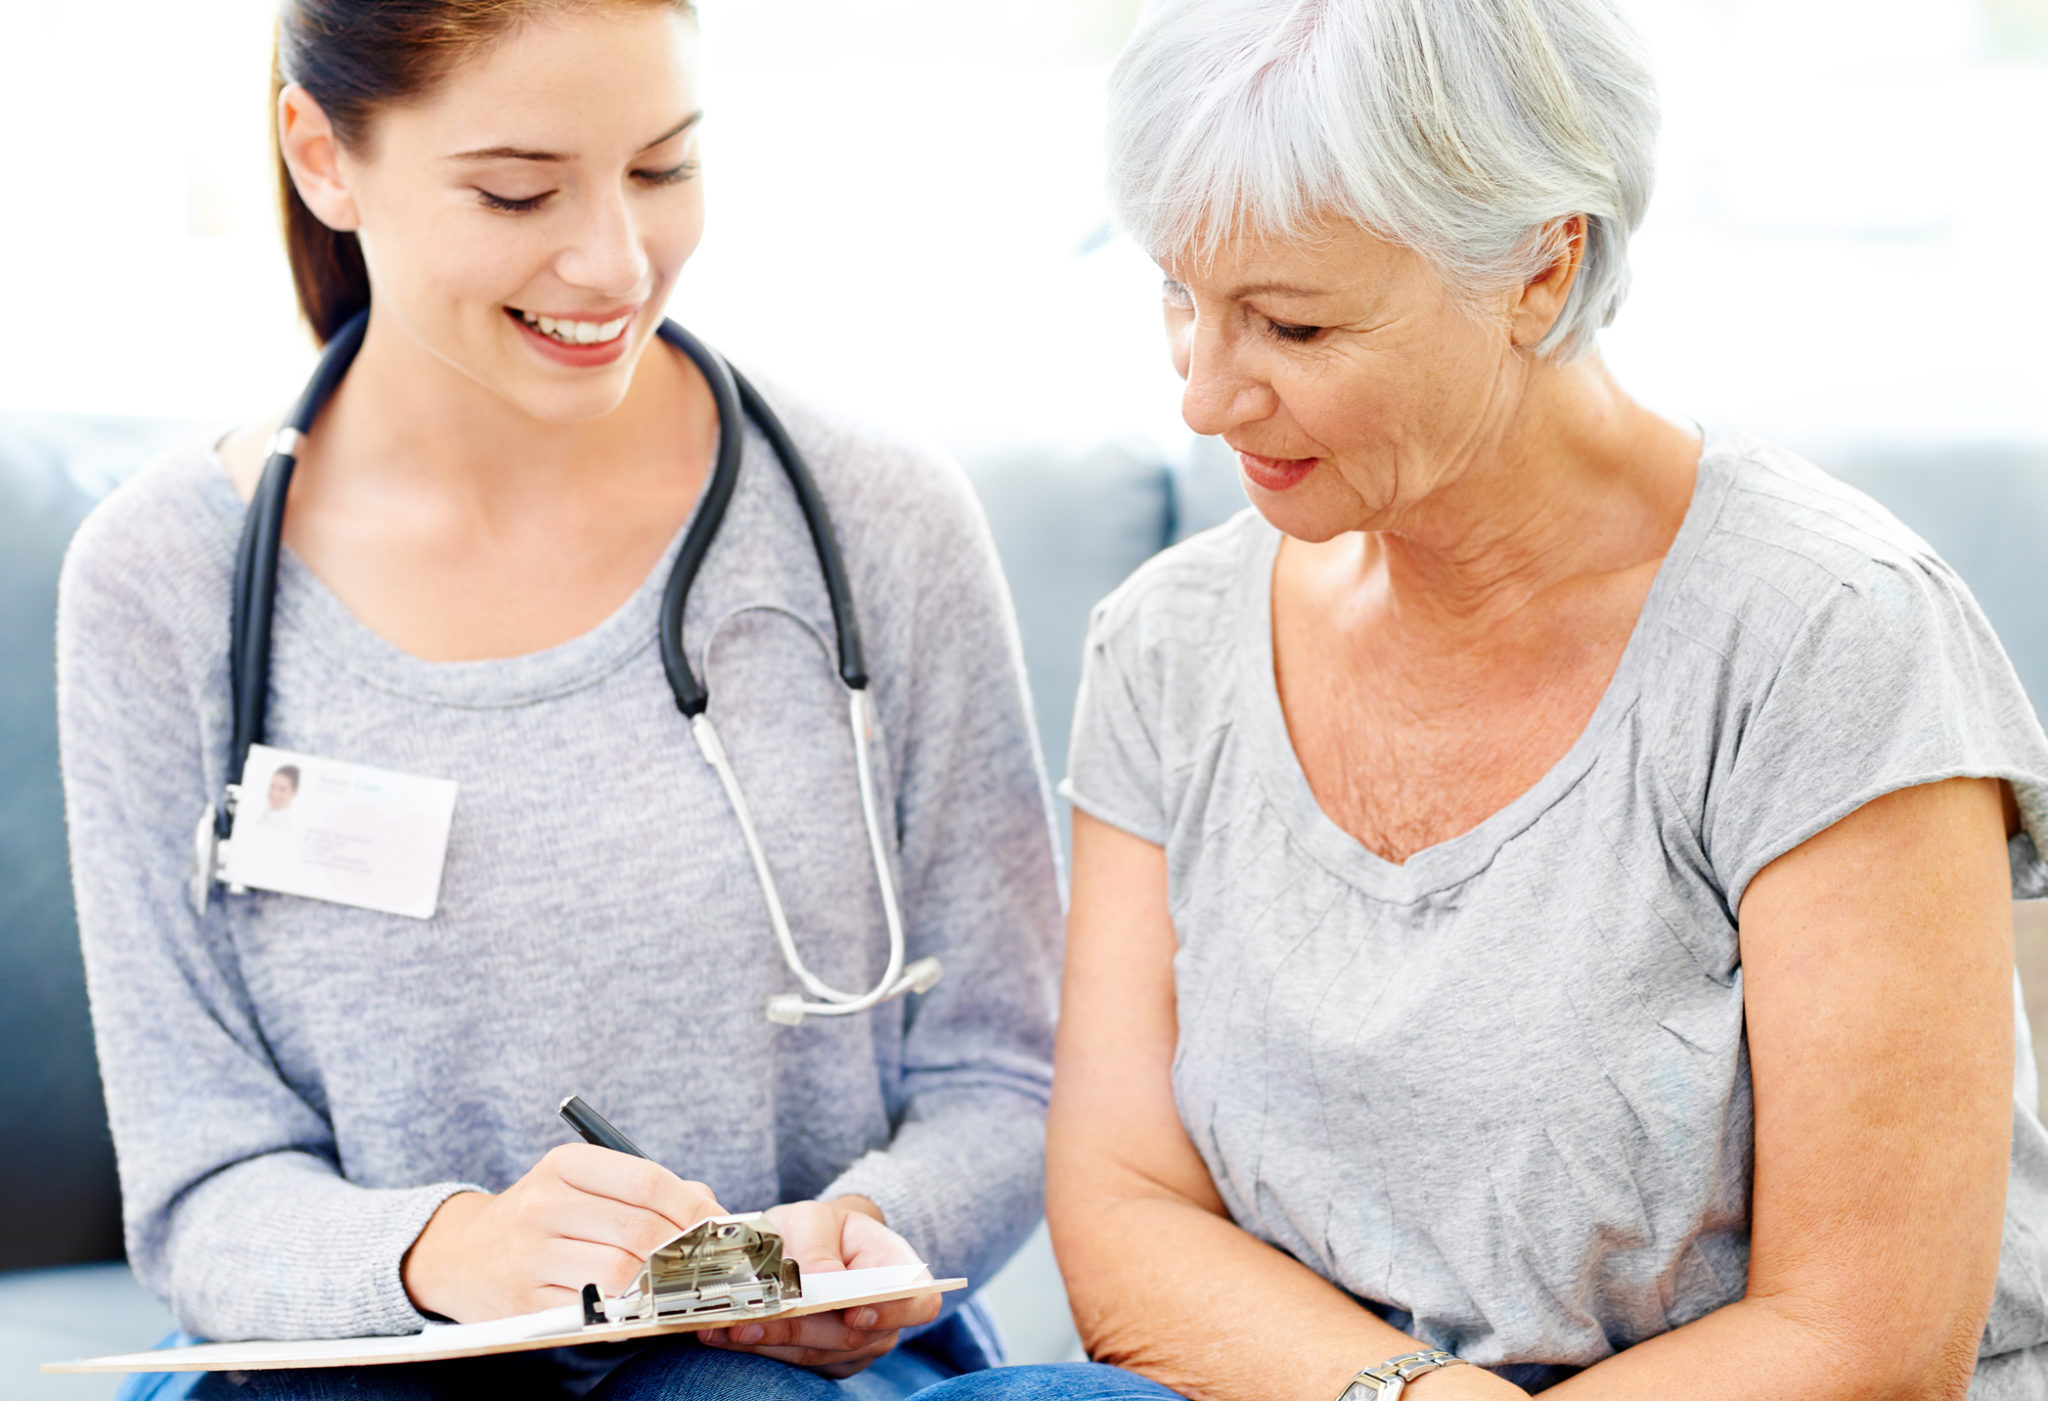 Senior Medical Appointments and Procedures Made Easier with These Tips